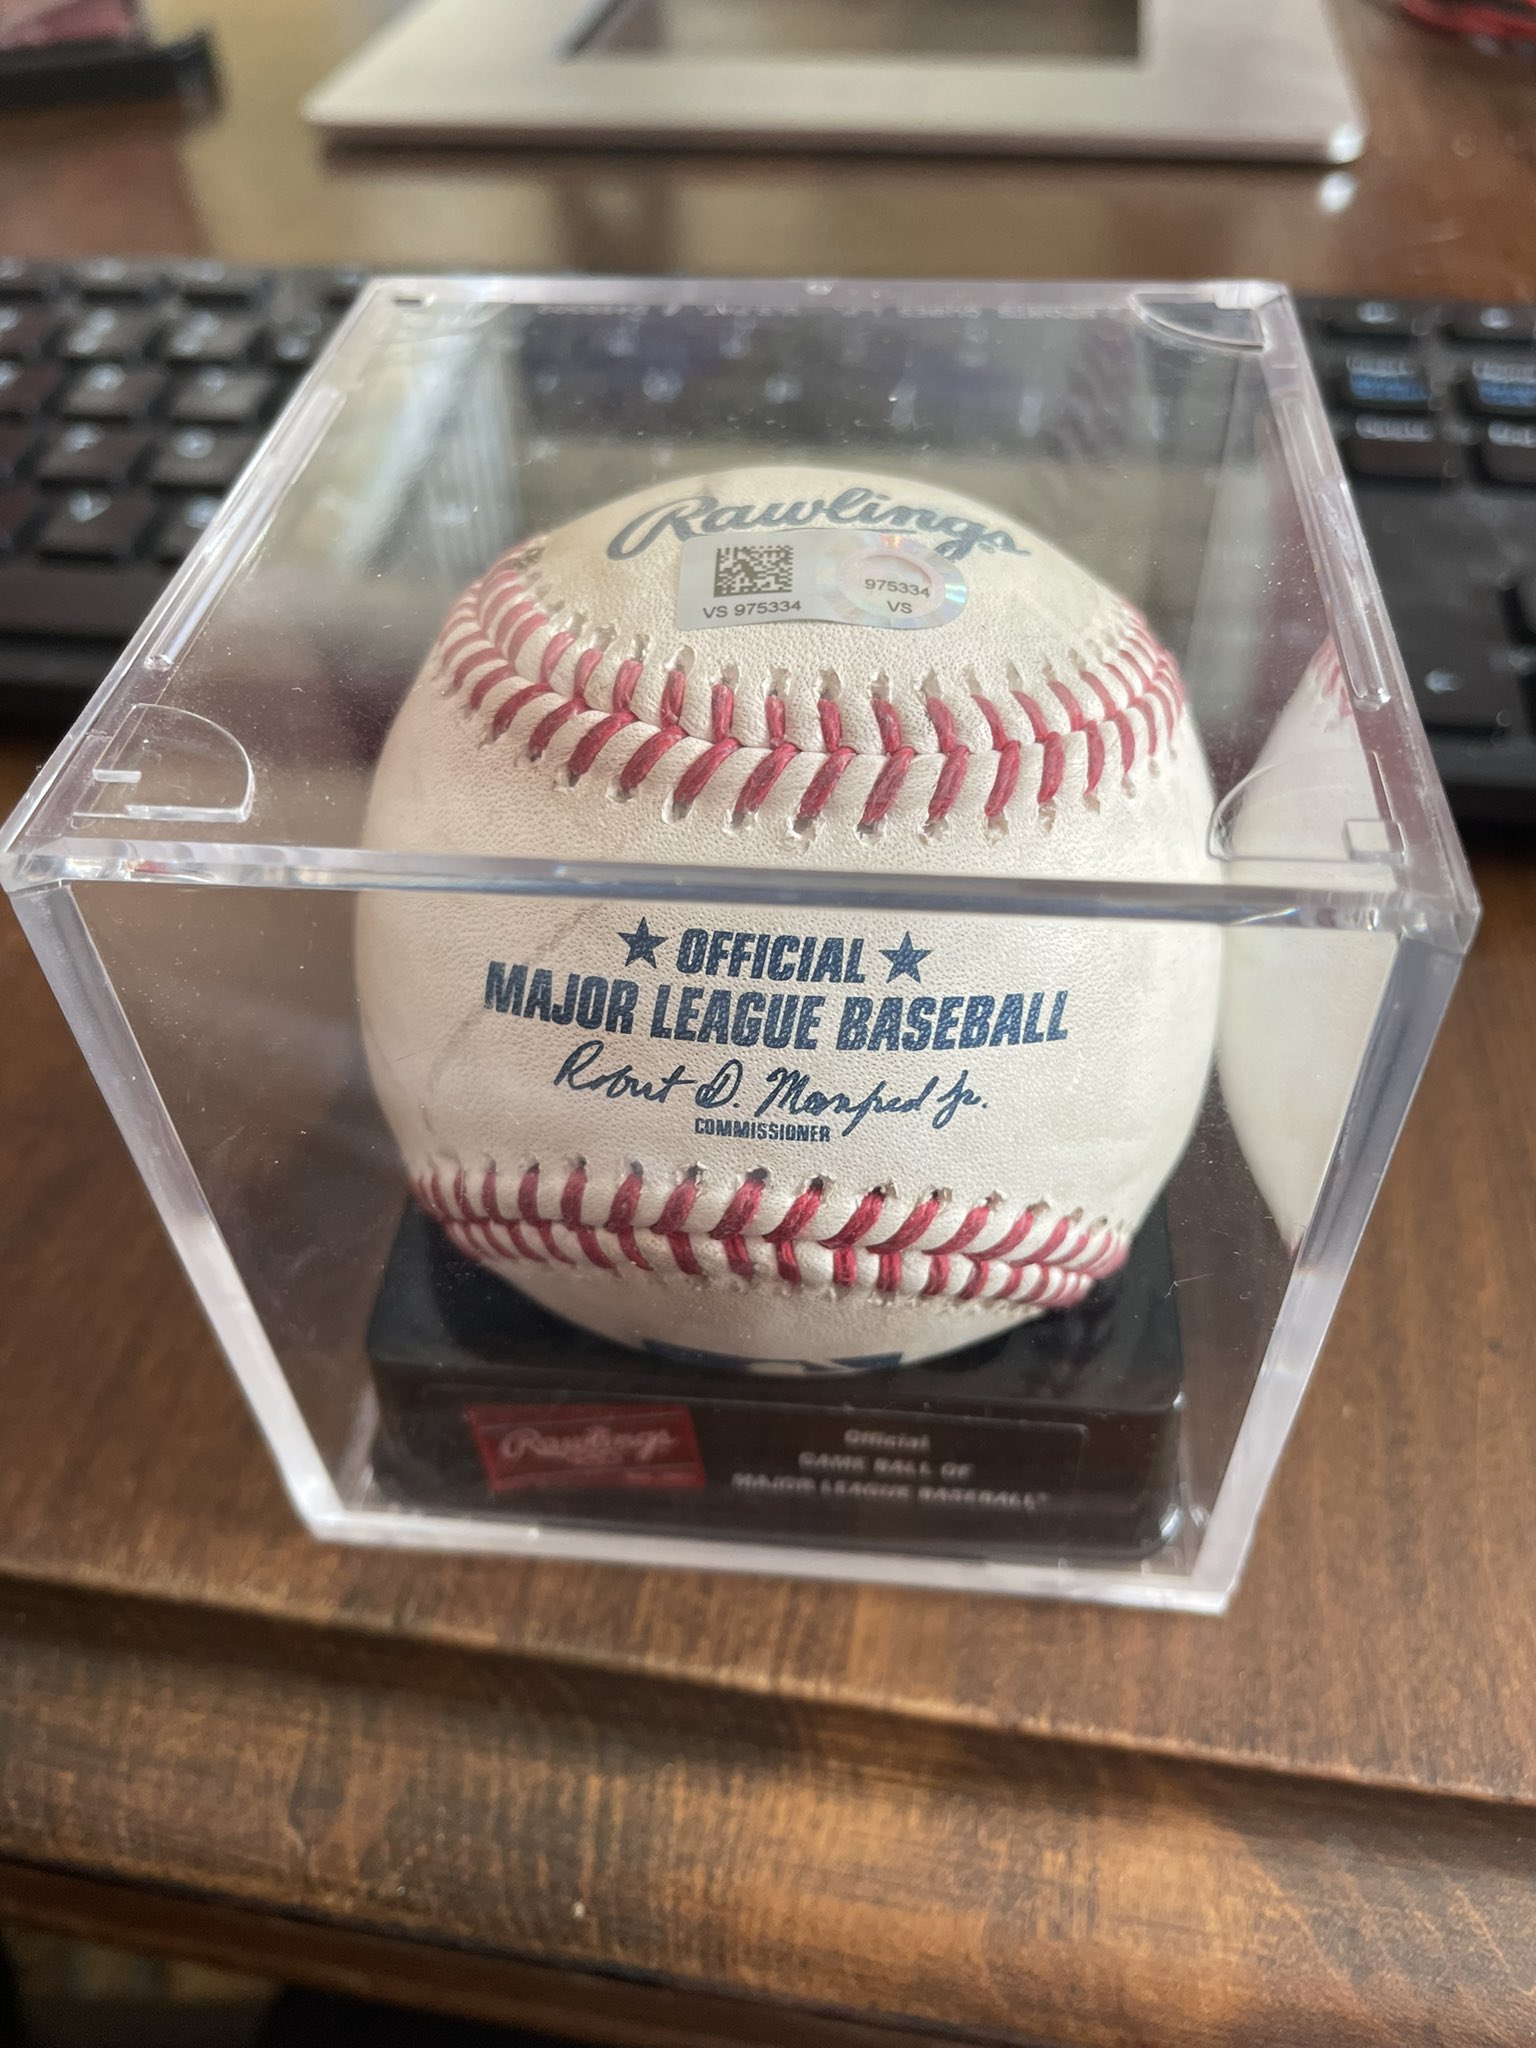 Kyle Walter On Twitter My Degrom Pitched Ball Got Uploaded This